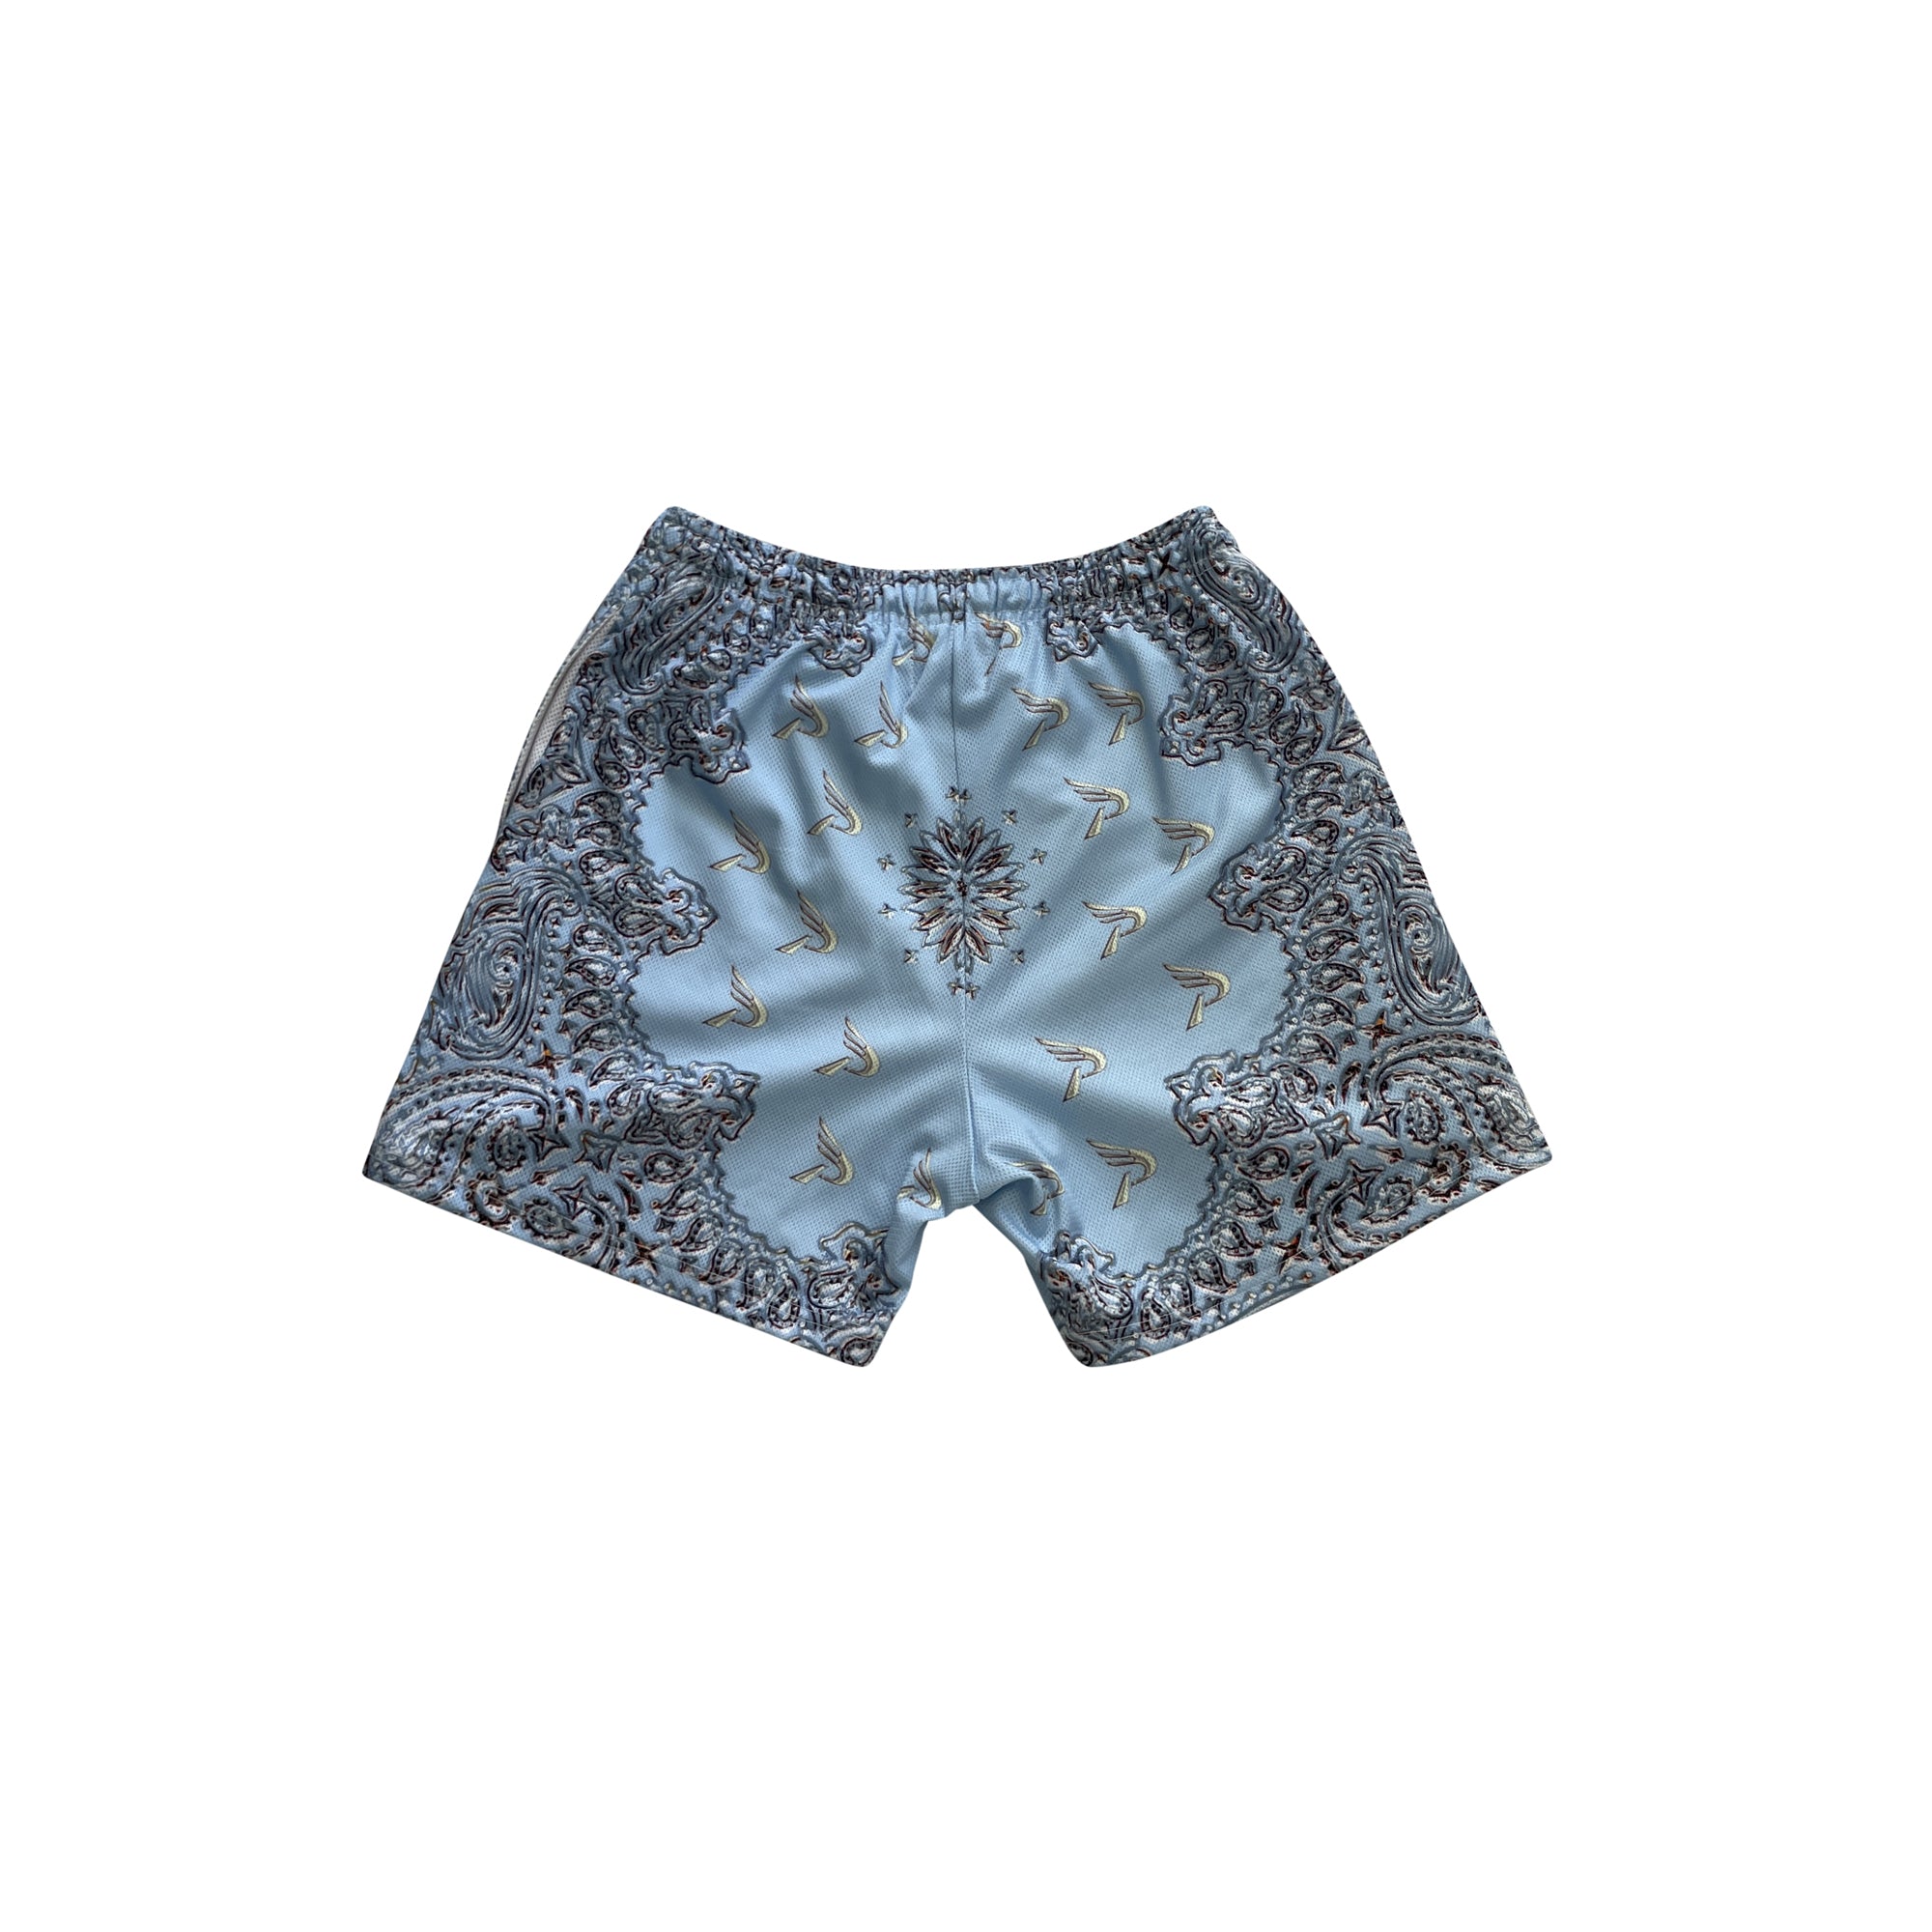 Povrich chrome shorts in baby blue. Comfortable and stylish shorts for any occasion